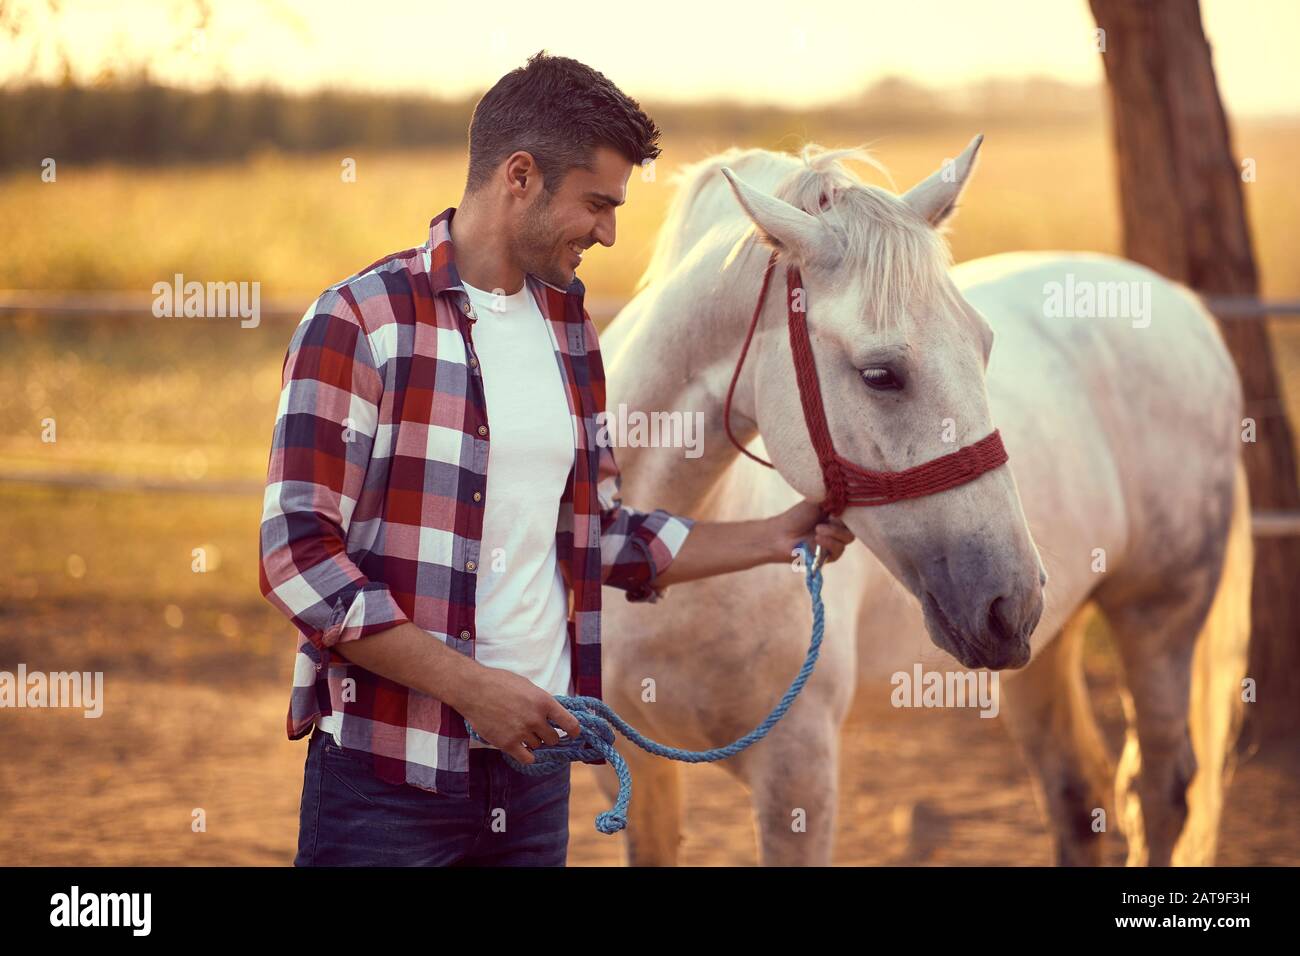 Handsome smiling man leading his white horse on the ranch.  Fun on countryside, sunset golden hour. Freedom nature concept. Stock Photo